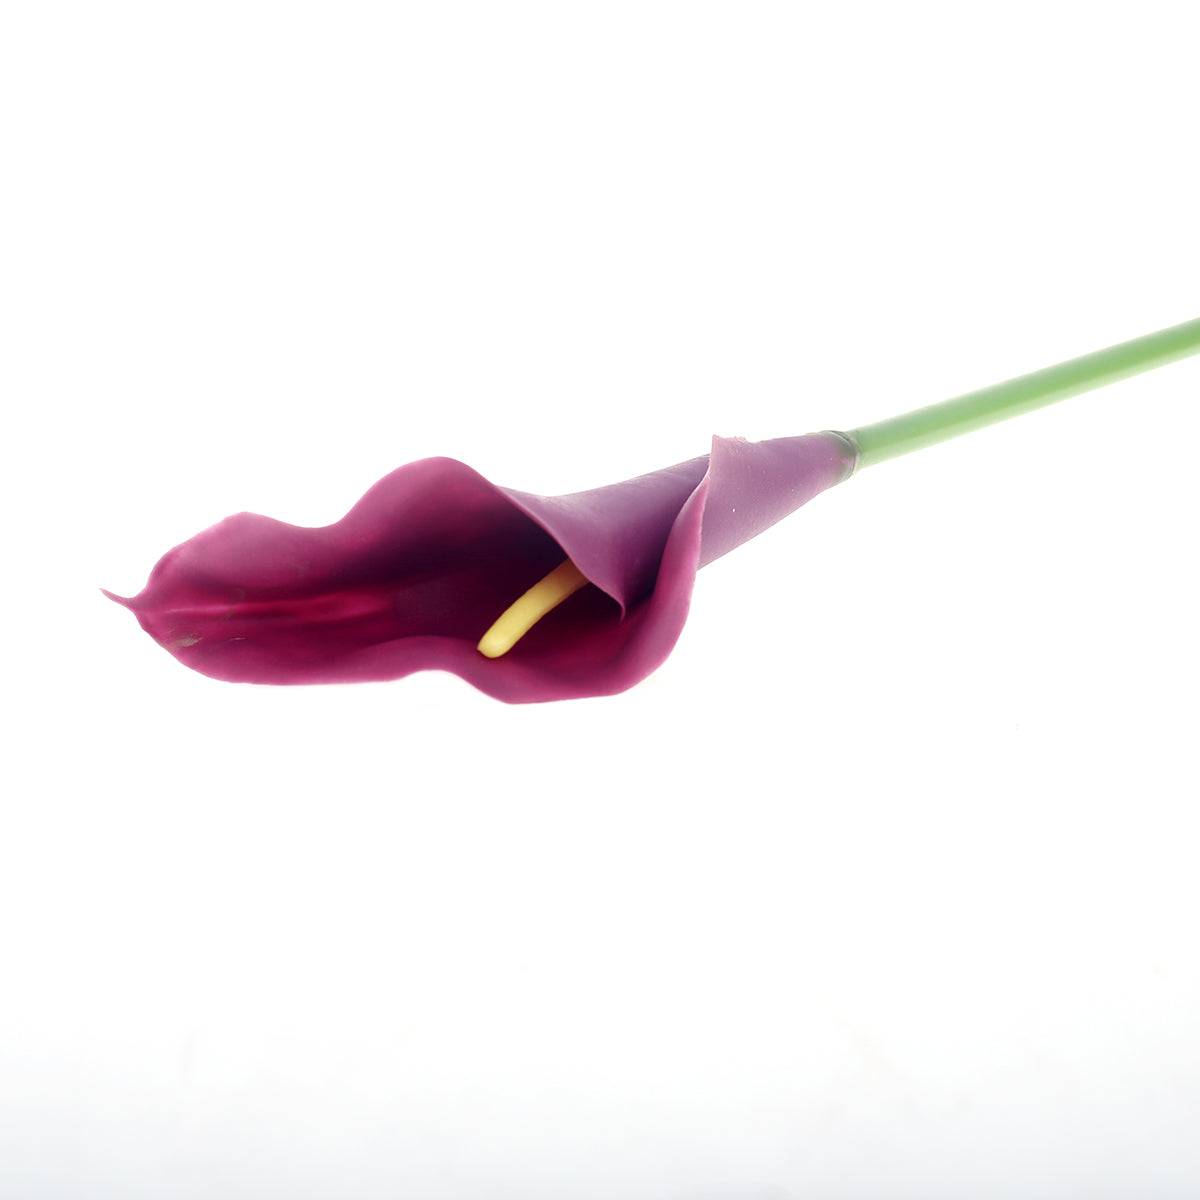 Callalily single flower.Unspecified...21260